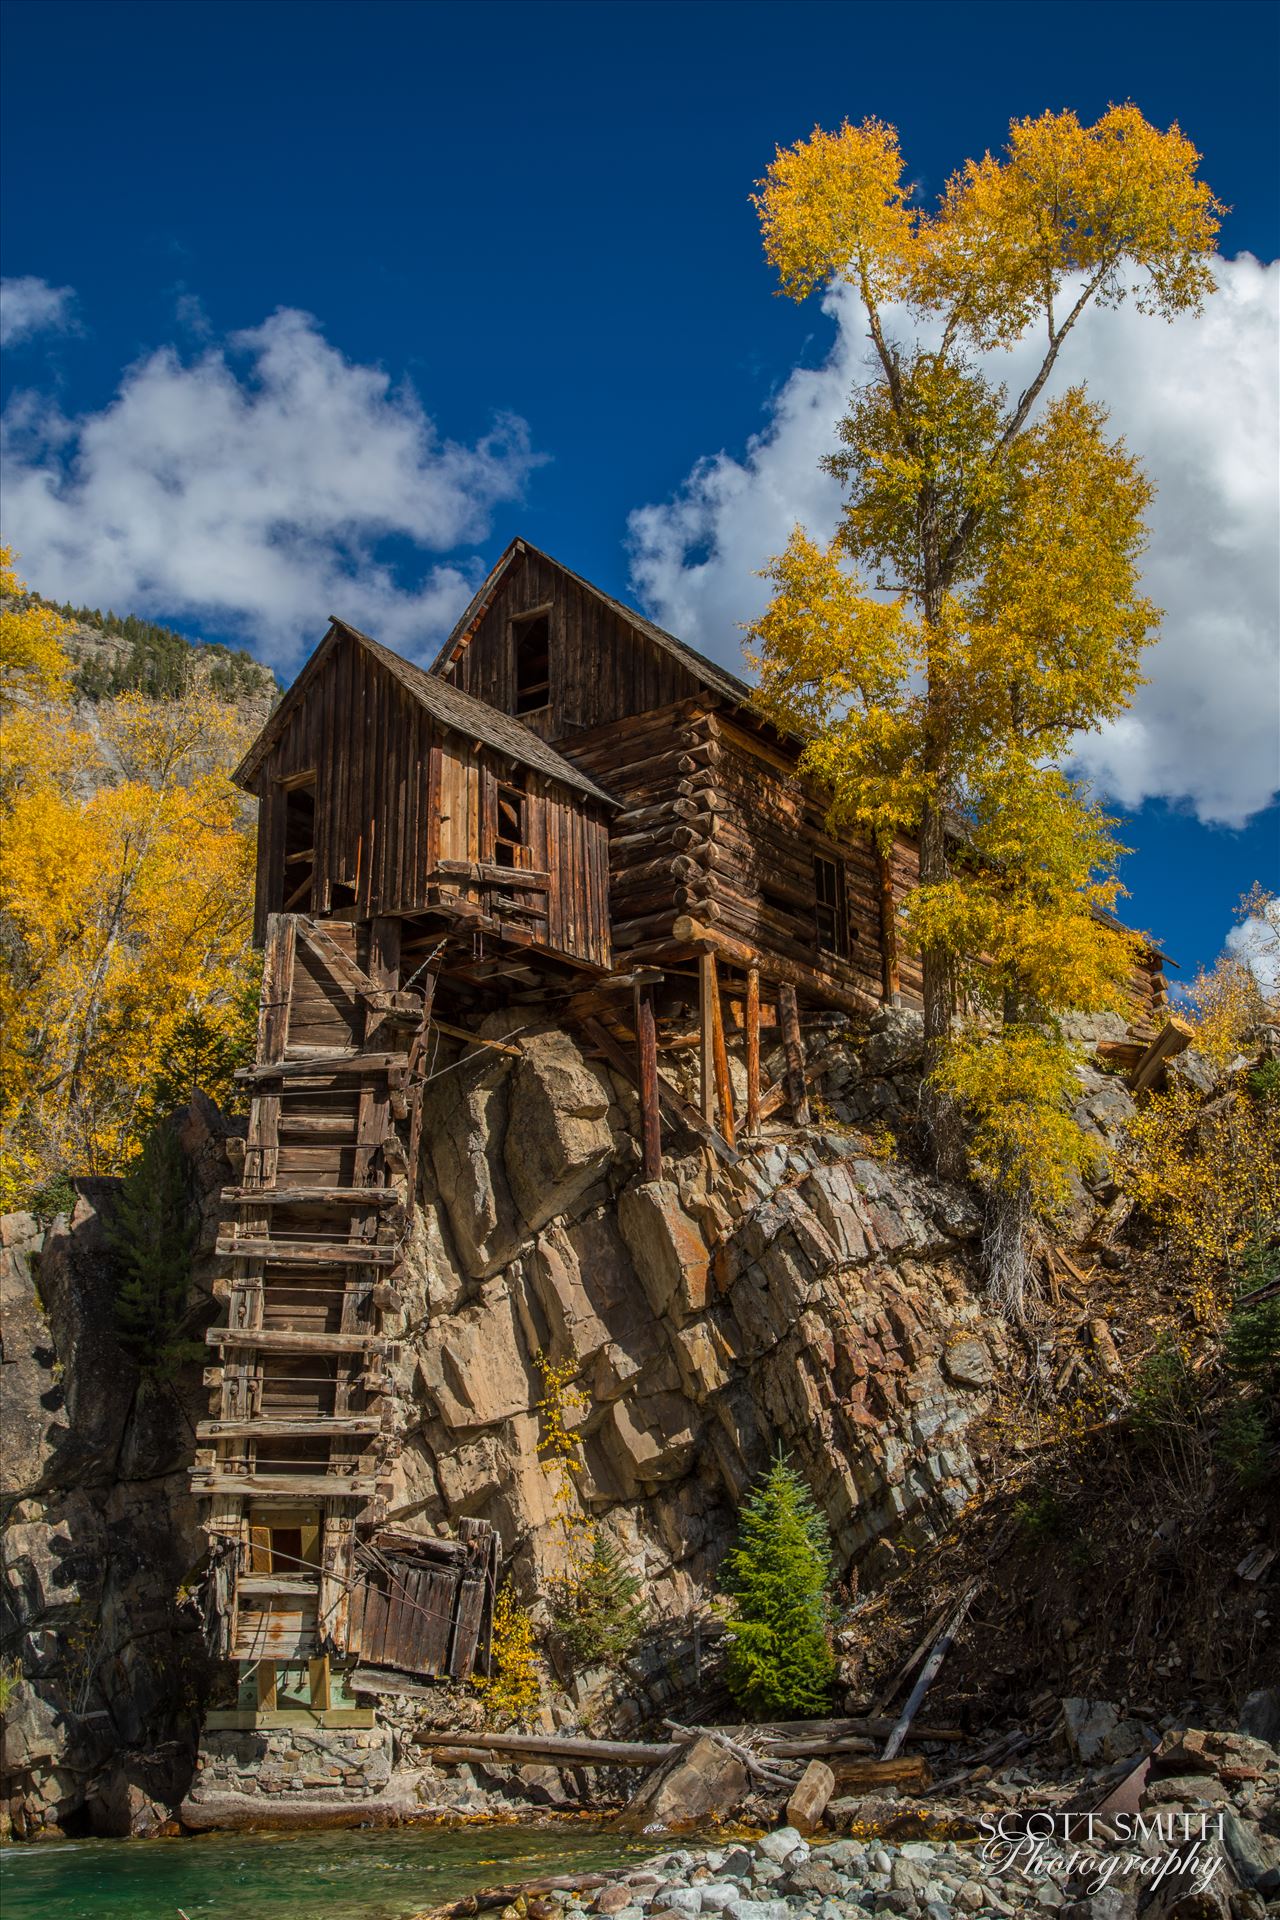 Crystal Mill, Colorado 01 The Crystal Mill, or the Old Mill is an 1892 wooden powerhouse located on an outcrop above the Crystal River in Crystal, Colorado by Scott Smith Photos